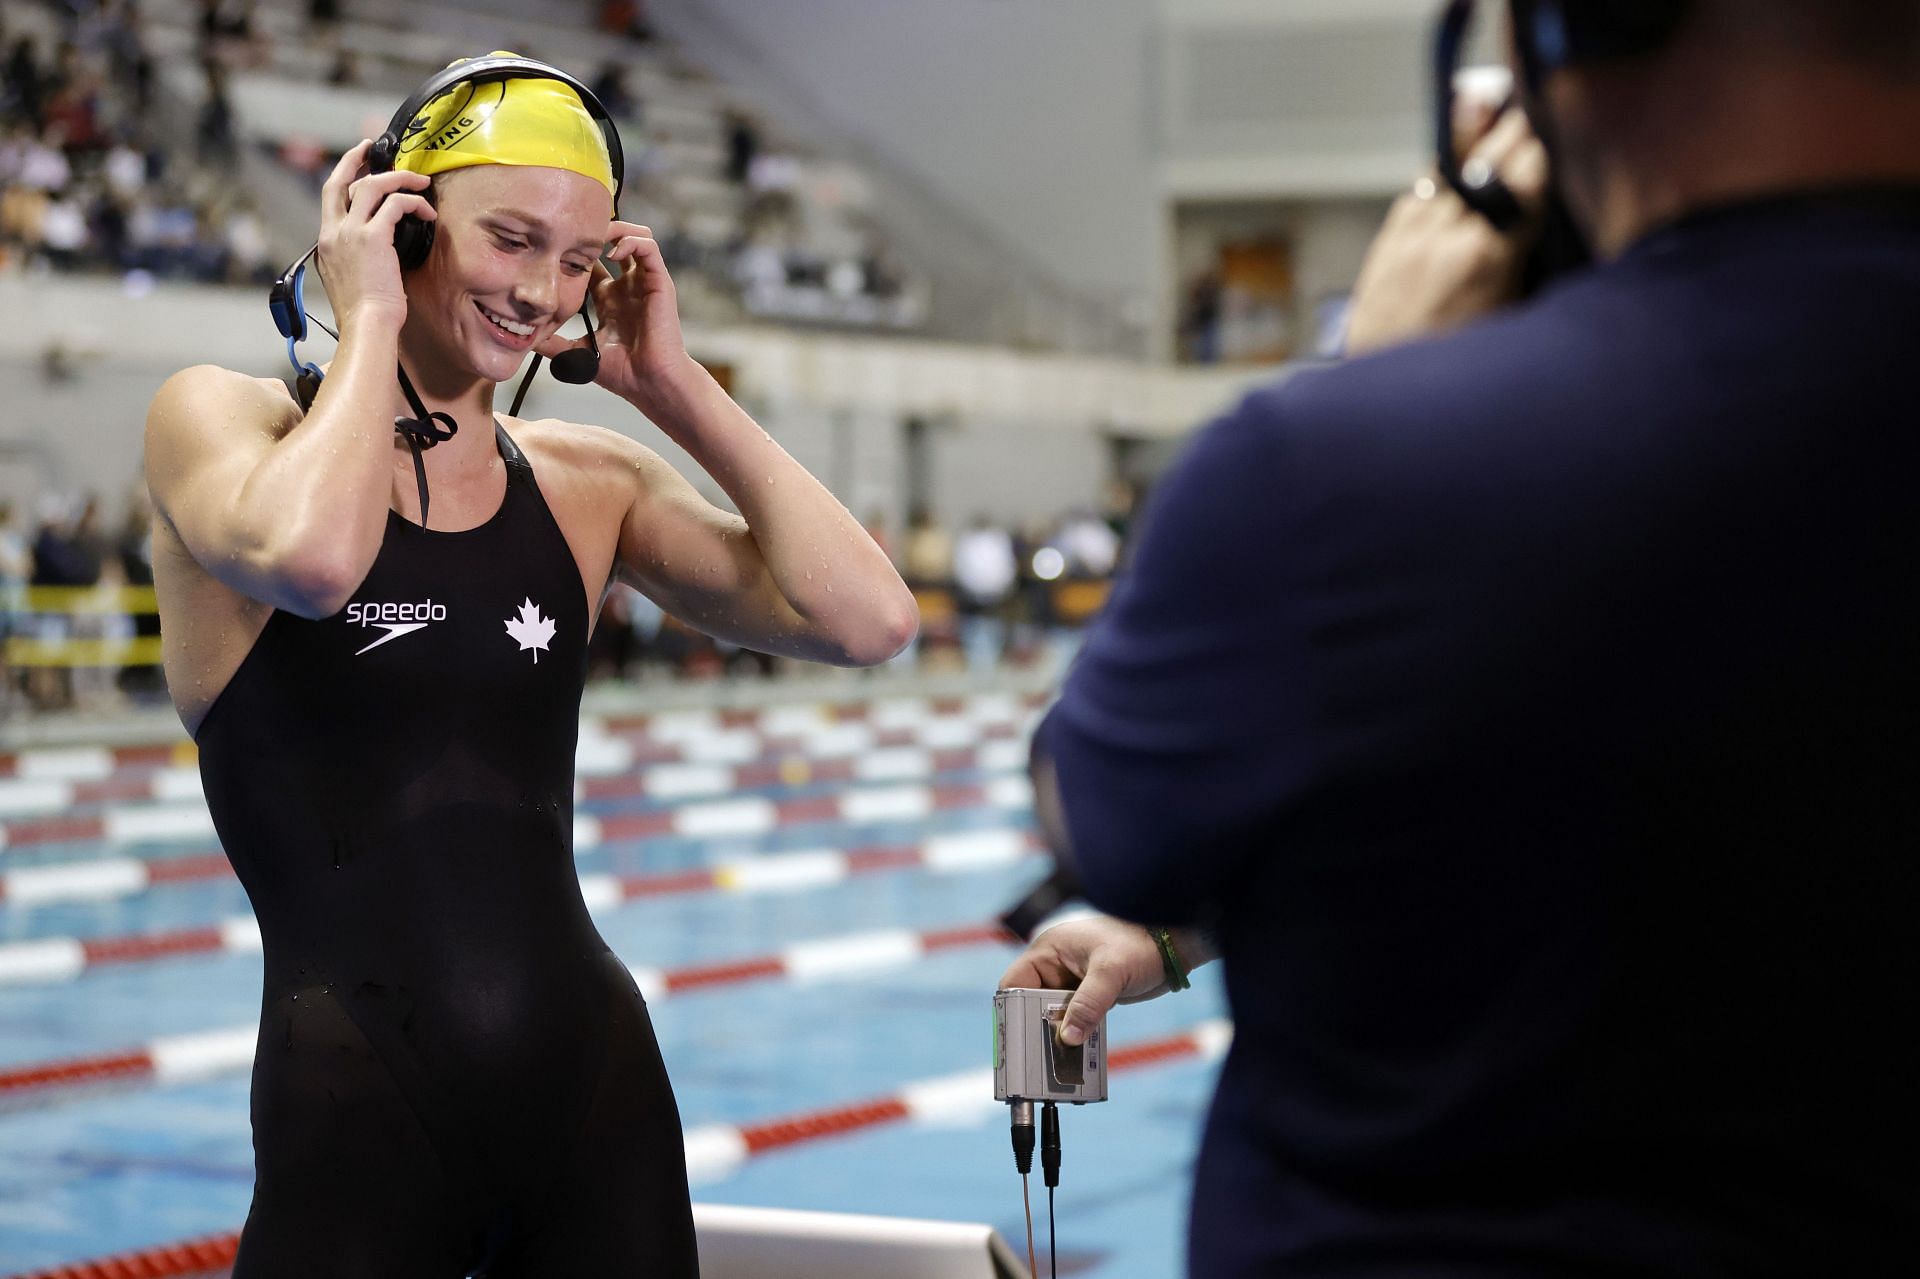 TYR Pro Swim Series Knoxville - Day 3